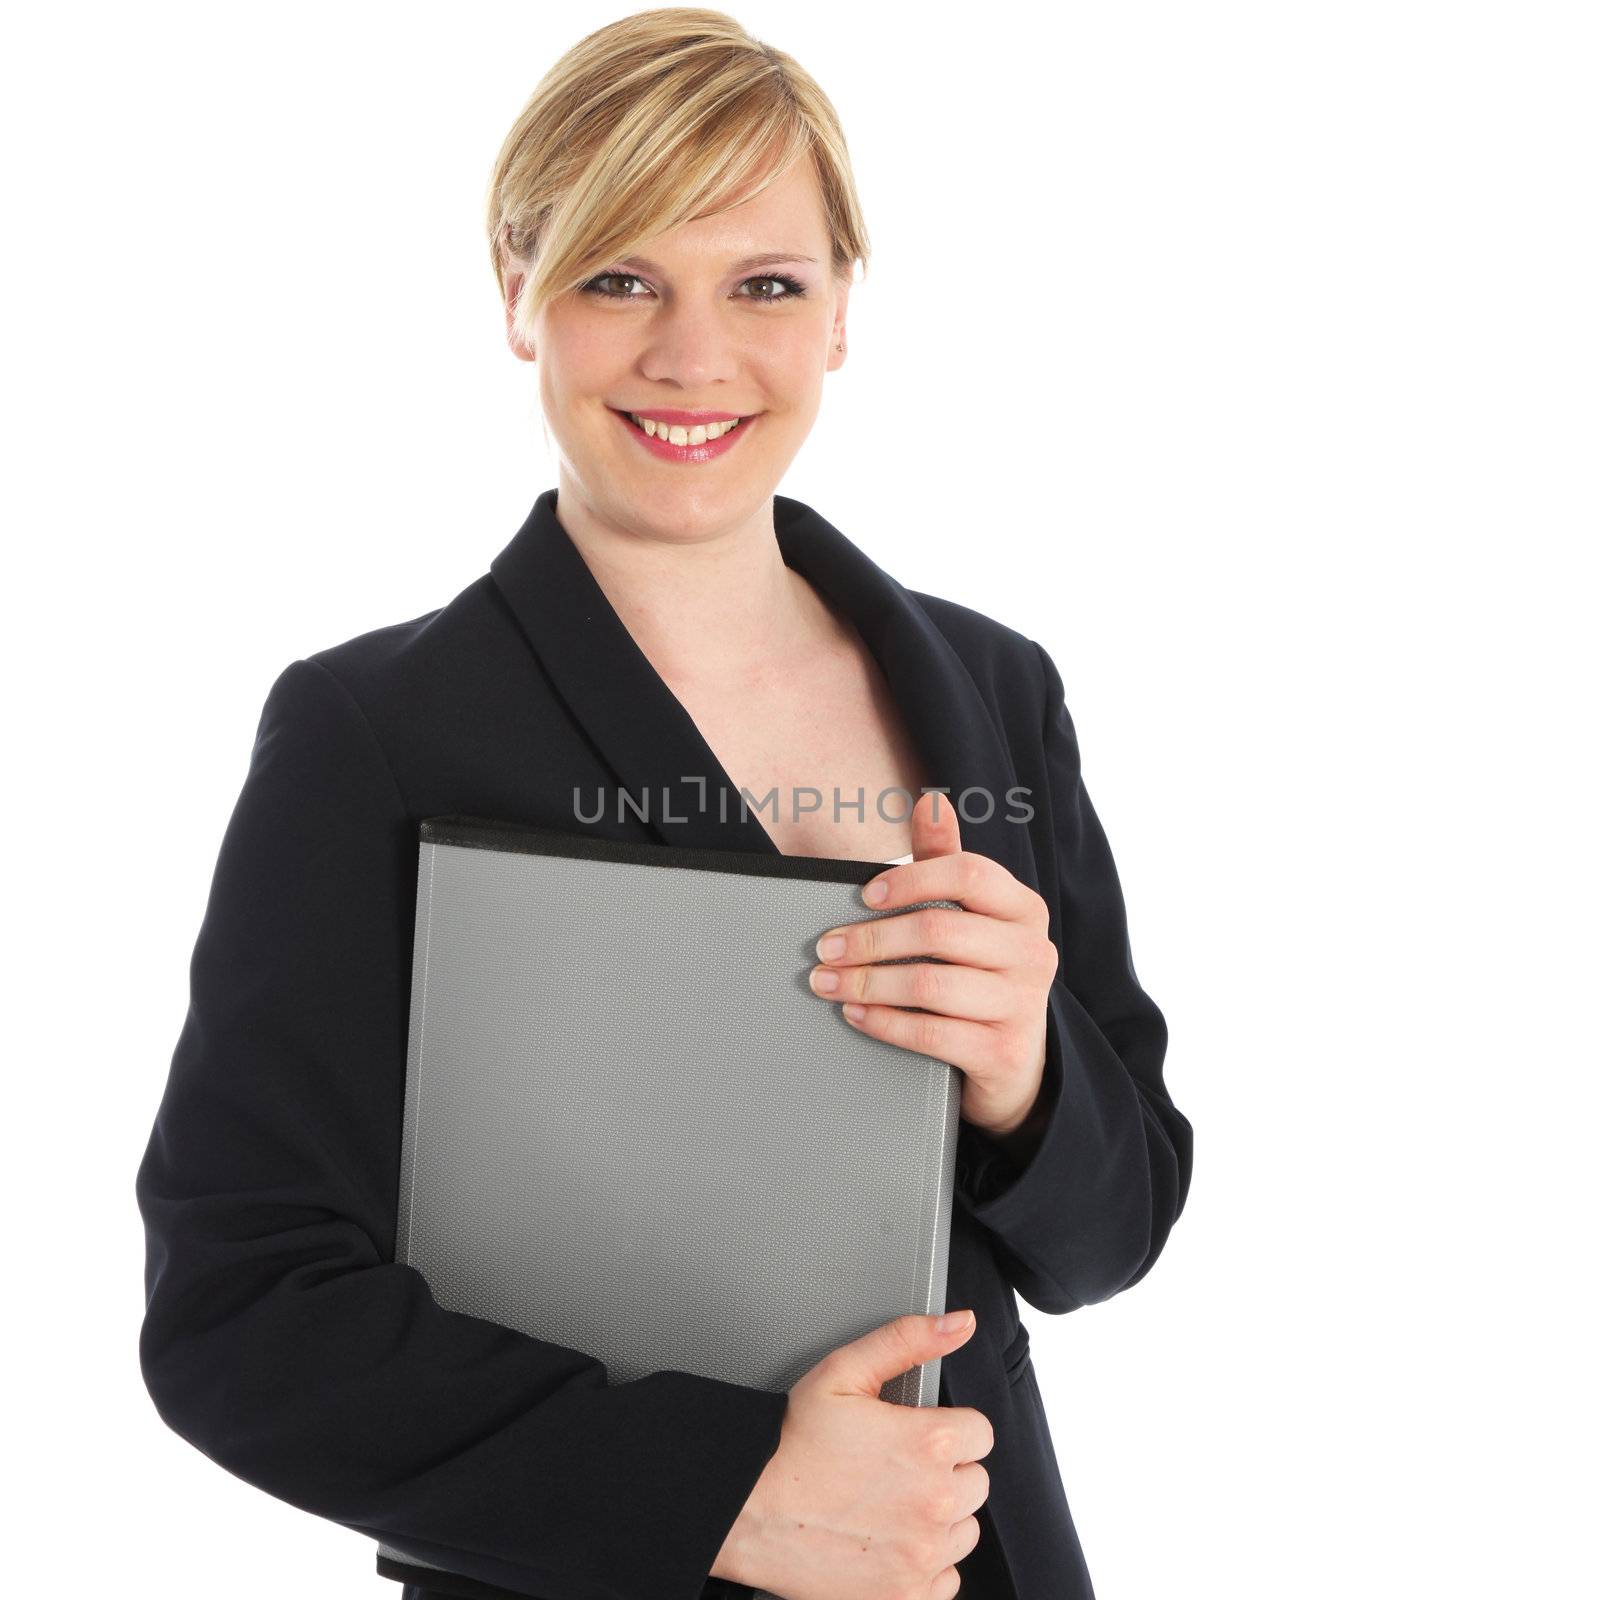 Half body portrait of a smiling beautiful young businesswoman or manageress standing holding a file or folio case isolated on white